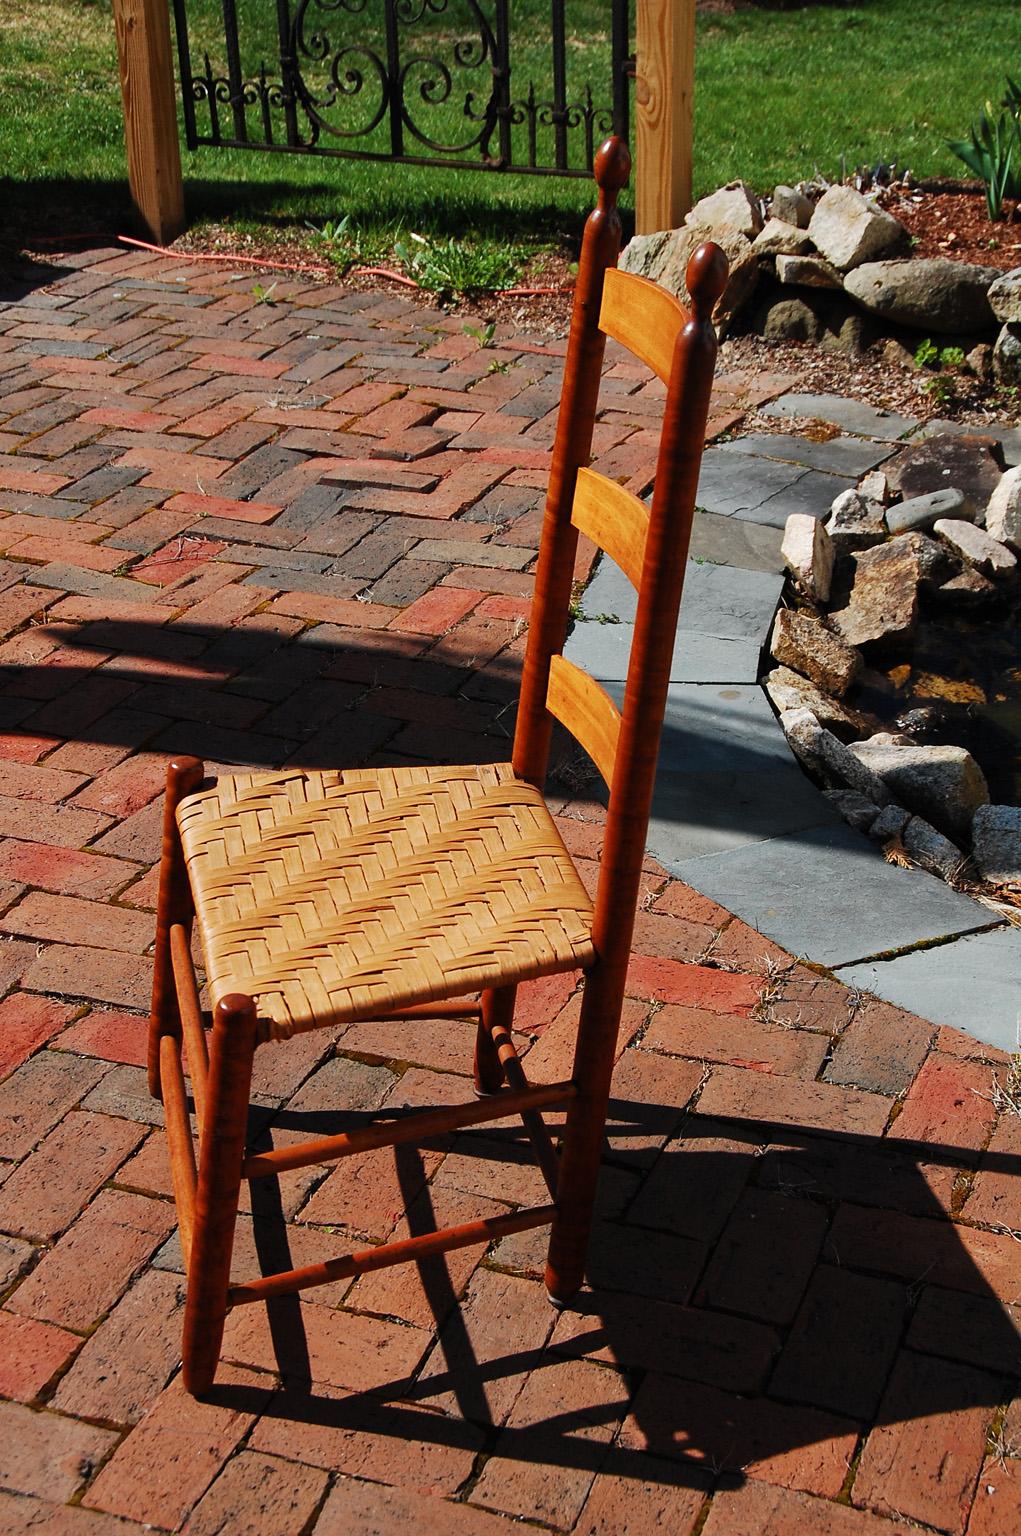 American curly maple Shaker ladderback side chair with woven splint seat and tilters to the back legs. The back leg tilter was an invention of the Shakers that allowed the user to tilt back in the chair without breaking the legs. The tilters were